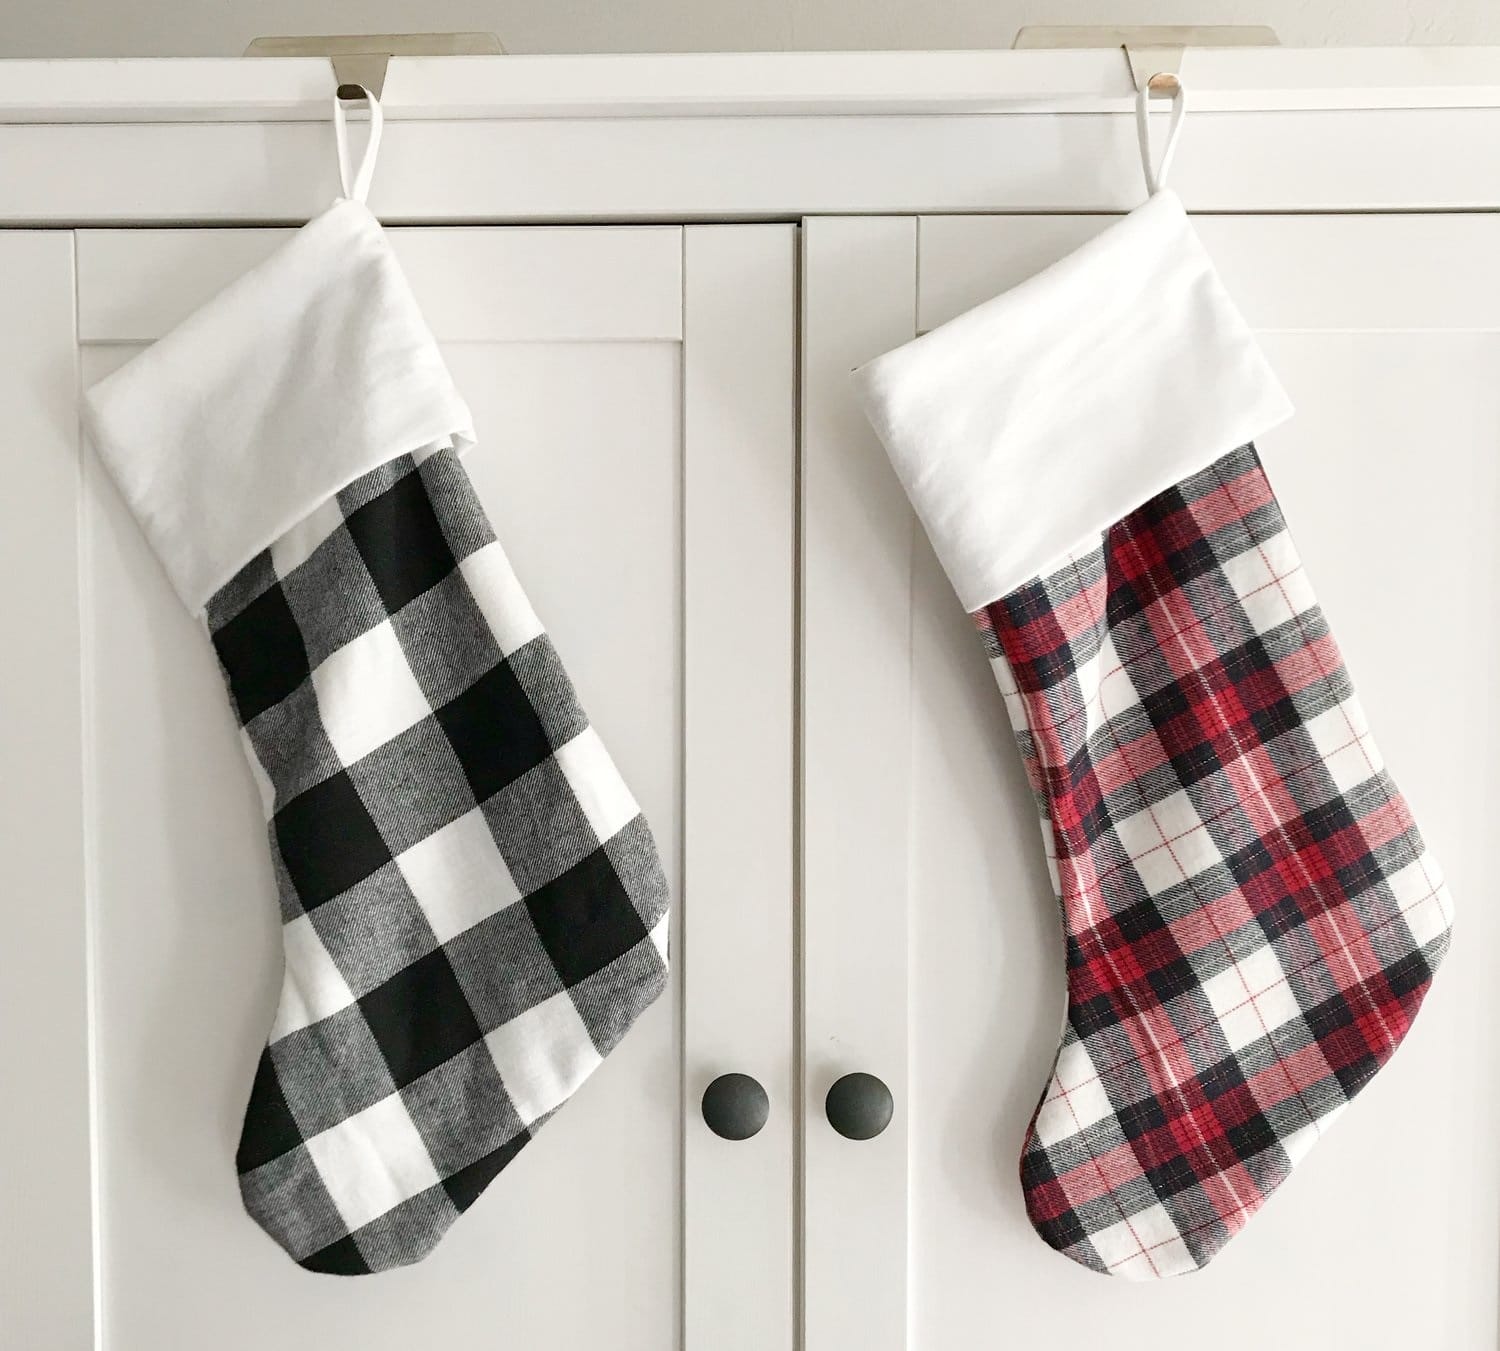 15 Delightful DIY Christmas Stockings You Will Want On Your Mantel